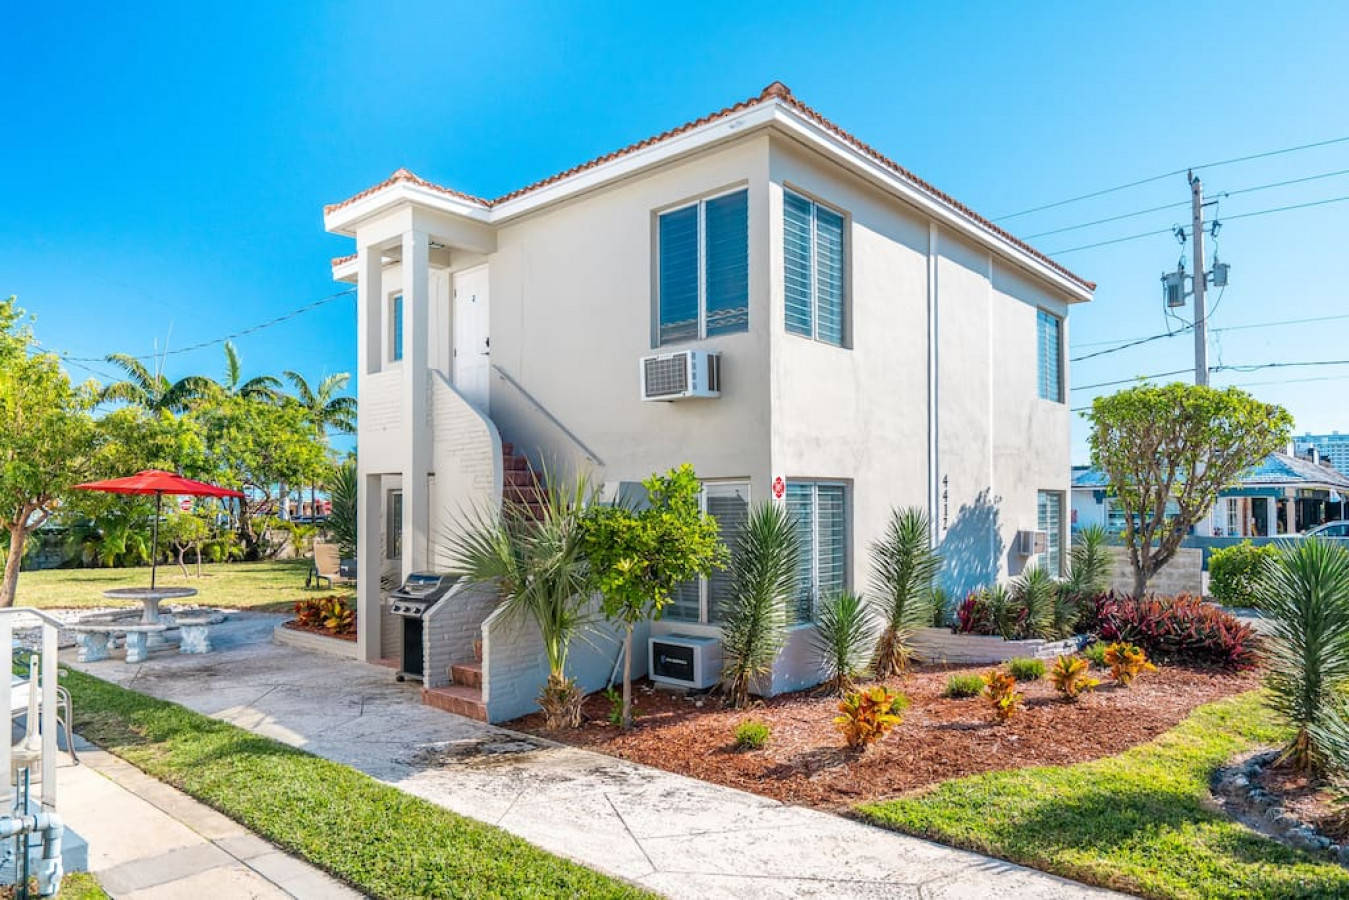 Lauderdale-by-the-Sea Vacation Rental